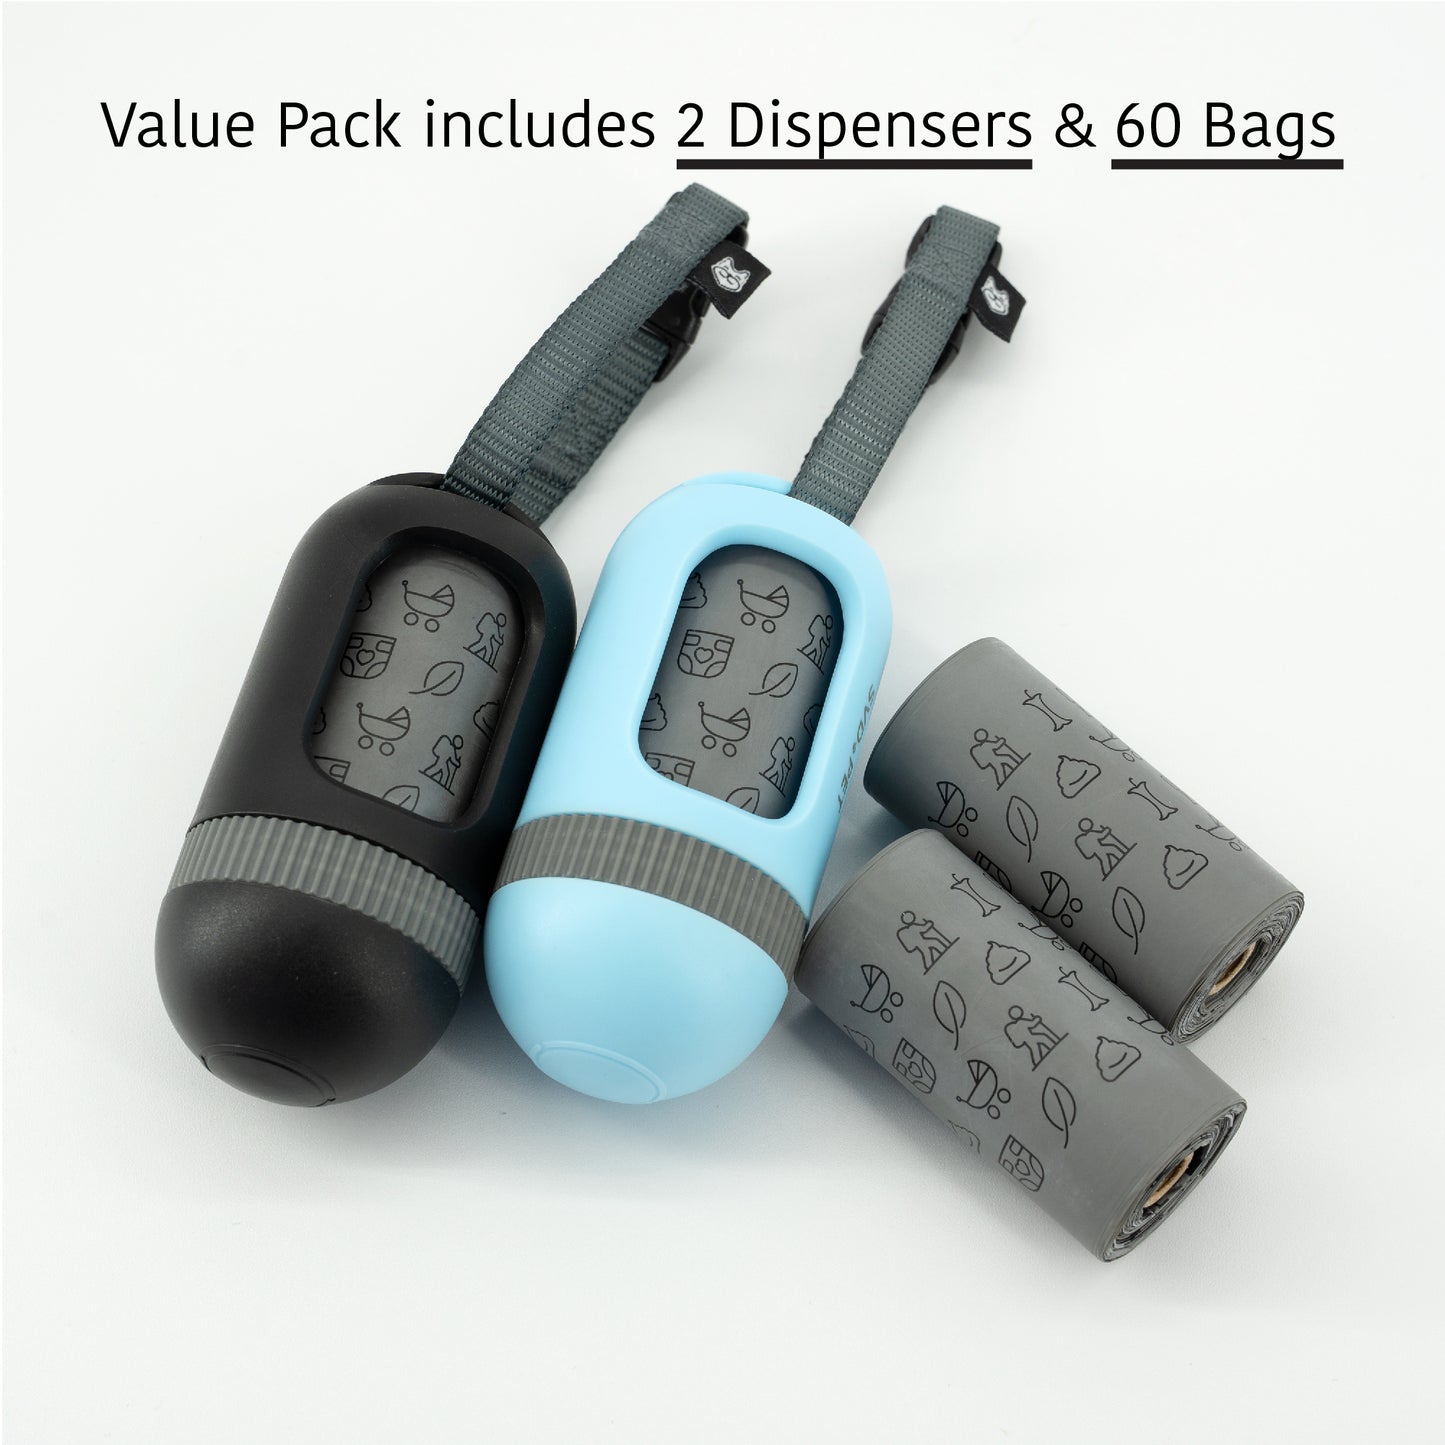 Waste Bags and Dispensers Value Pack